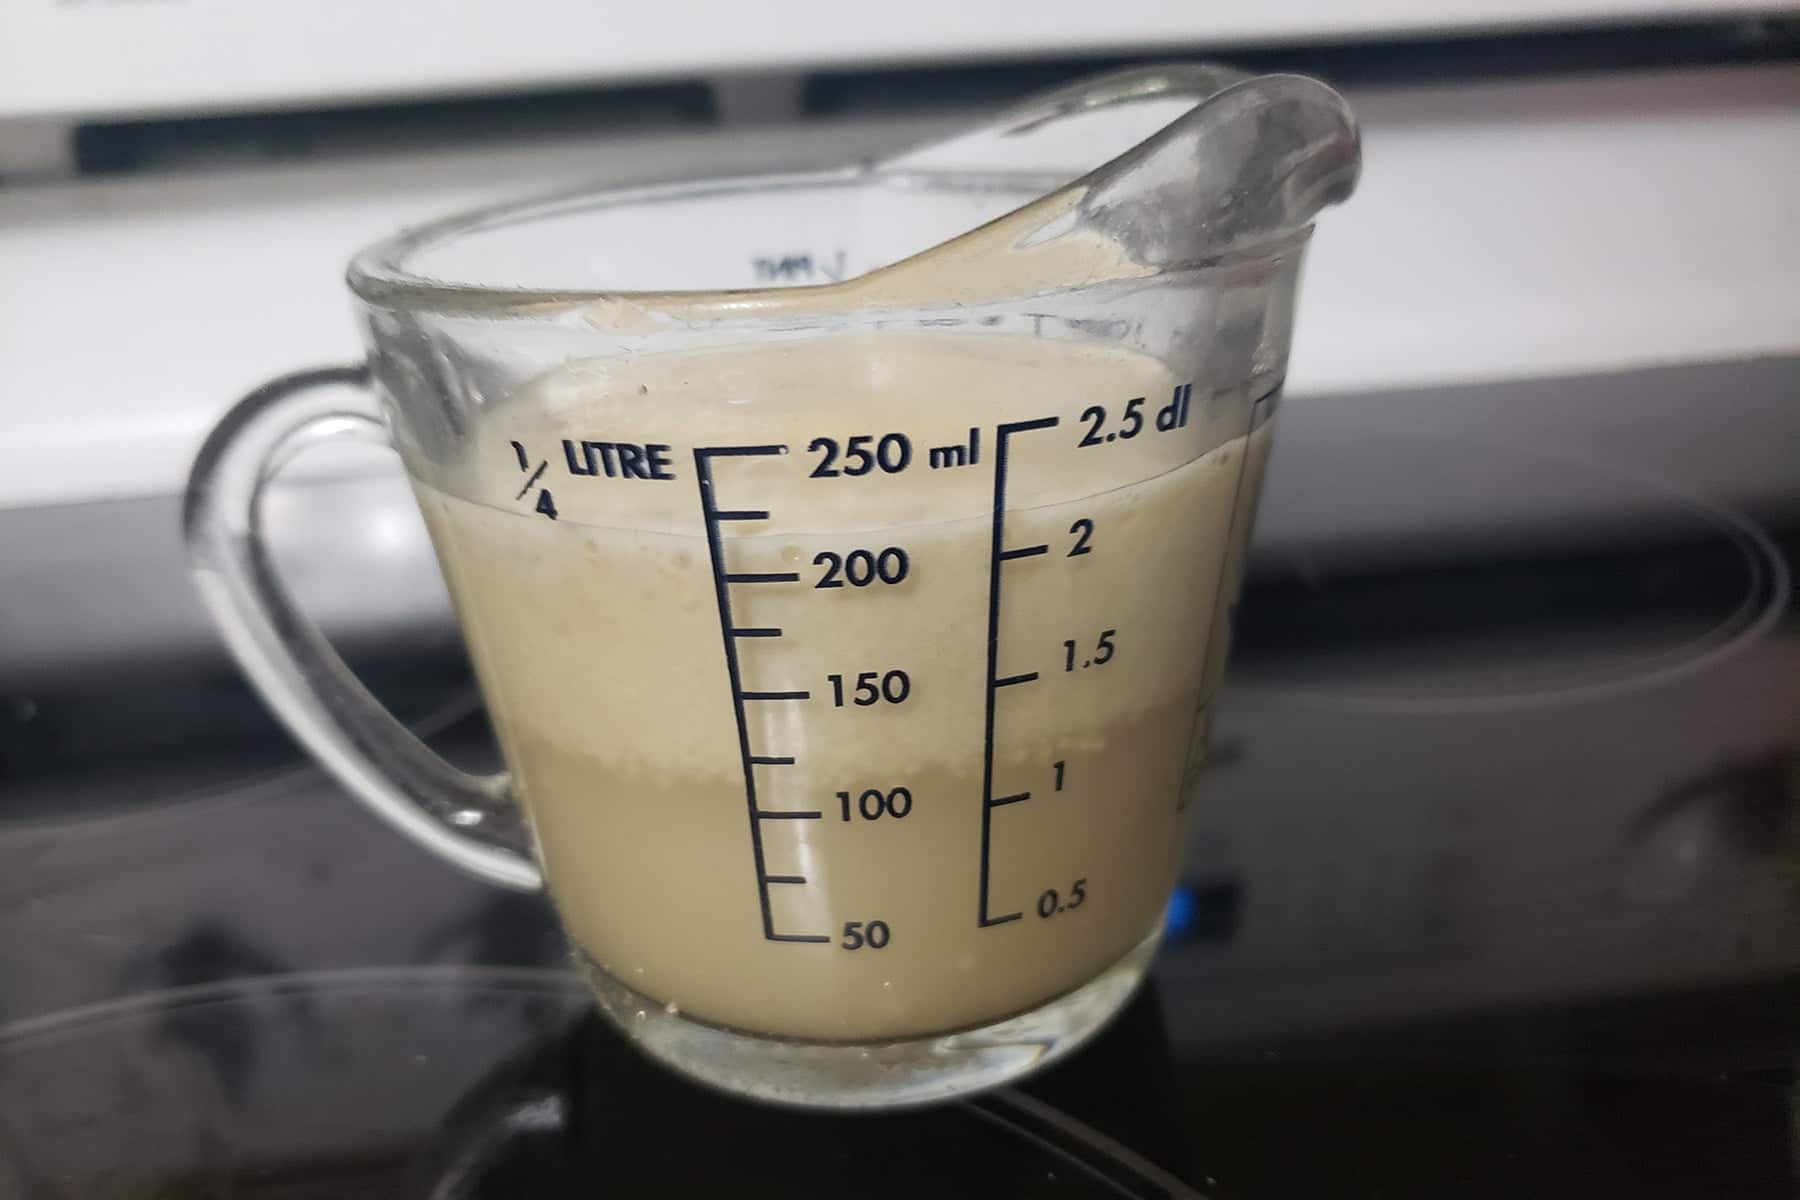 A glass measuring cup with yeasty water growing in it.